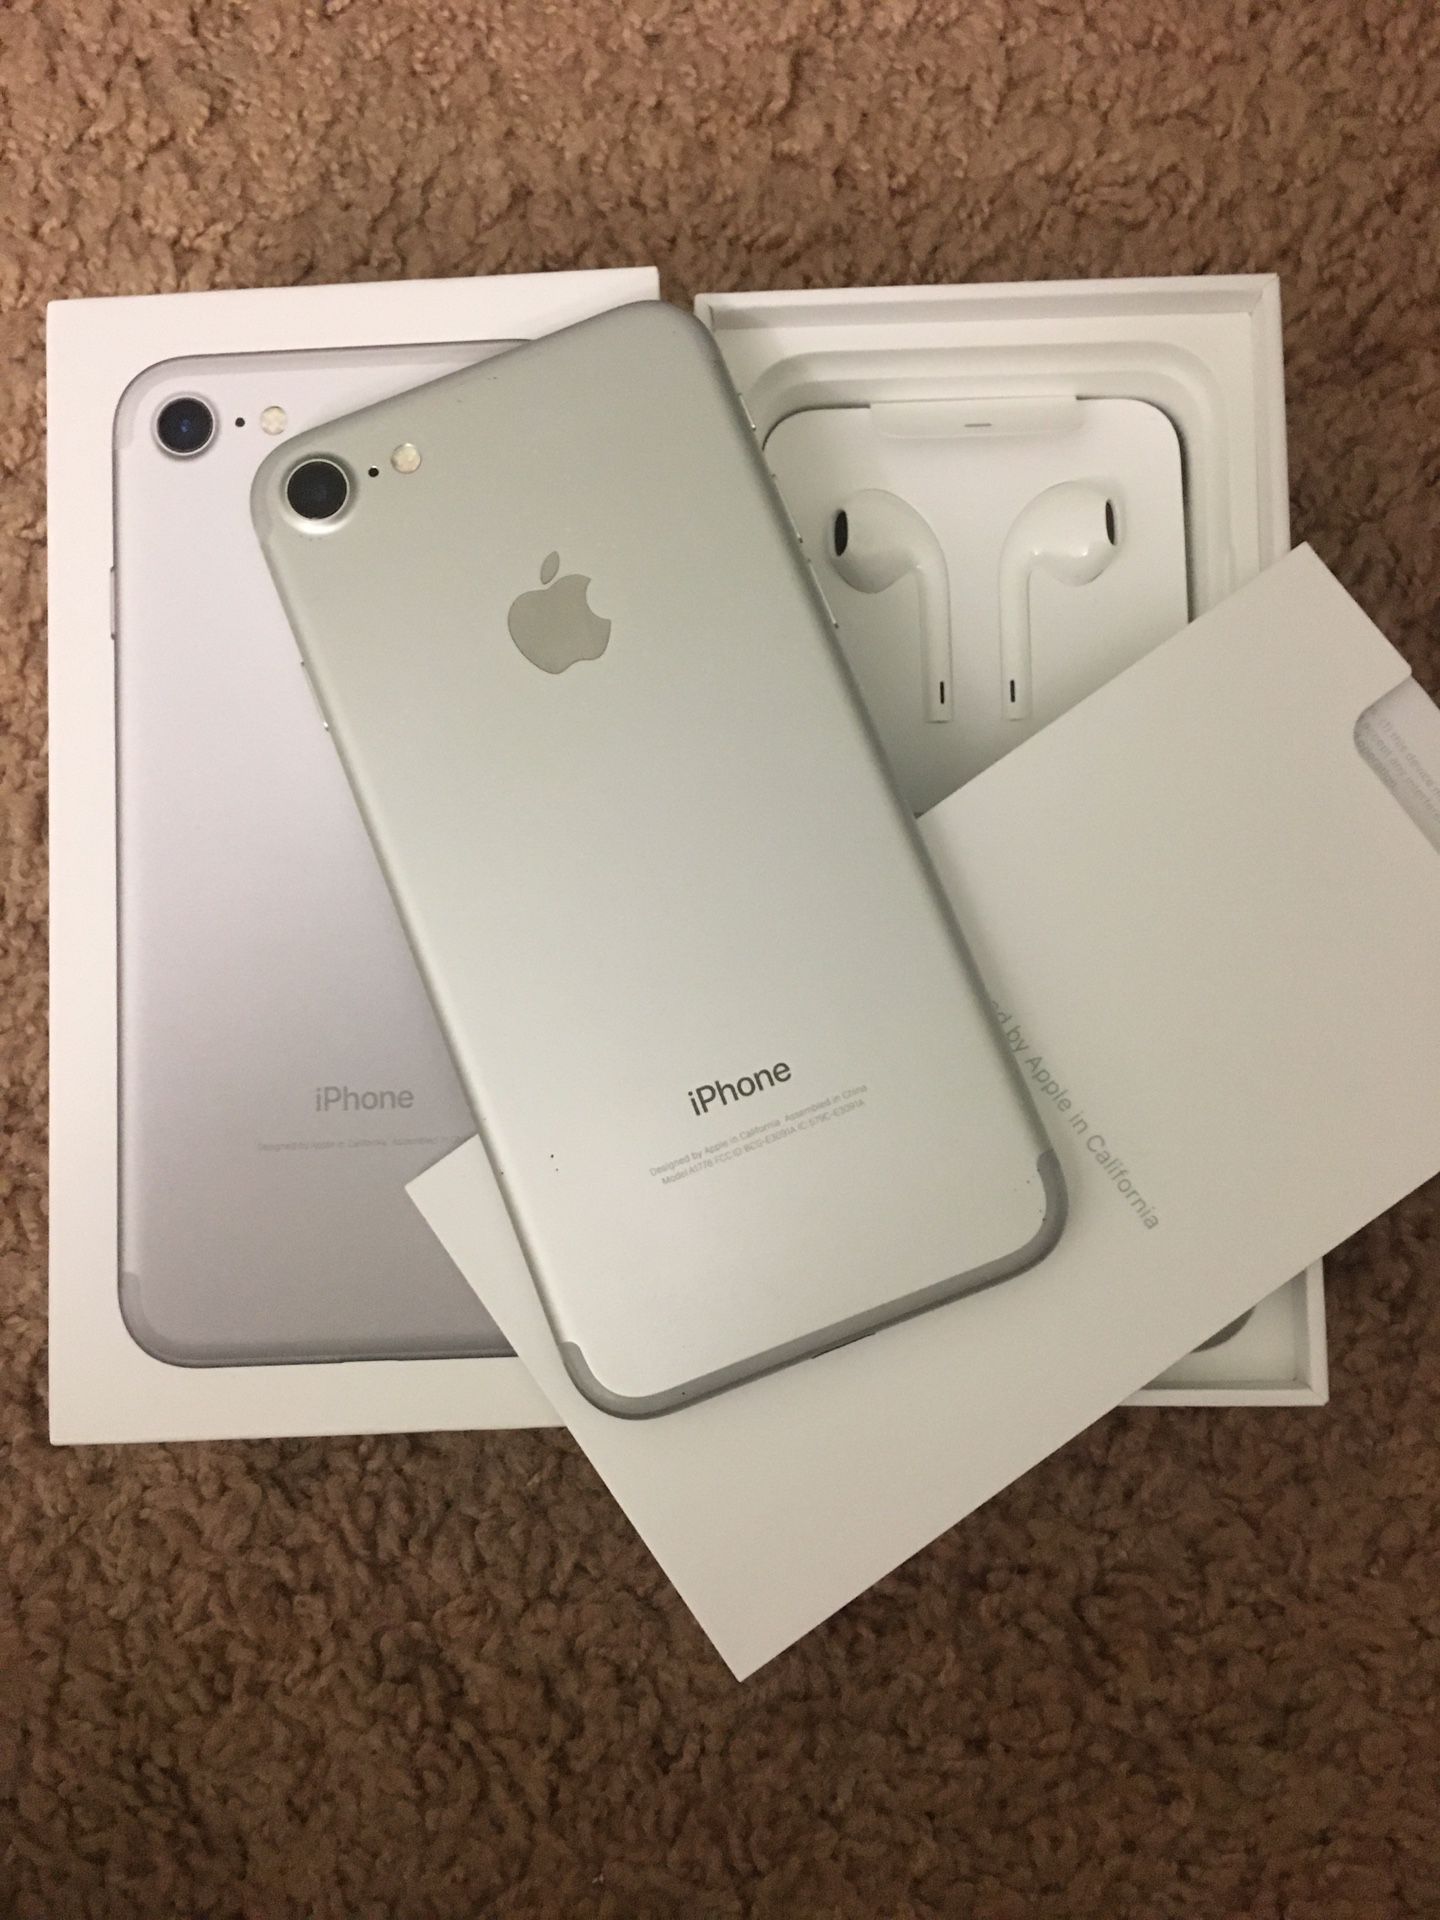 iPhone 7 Carrier and iCloud unlocked